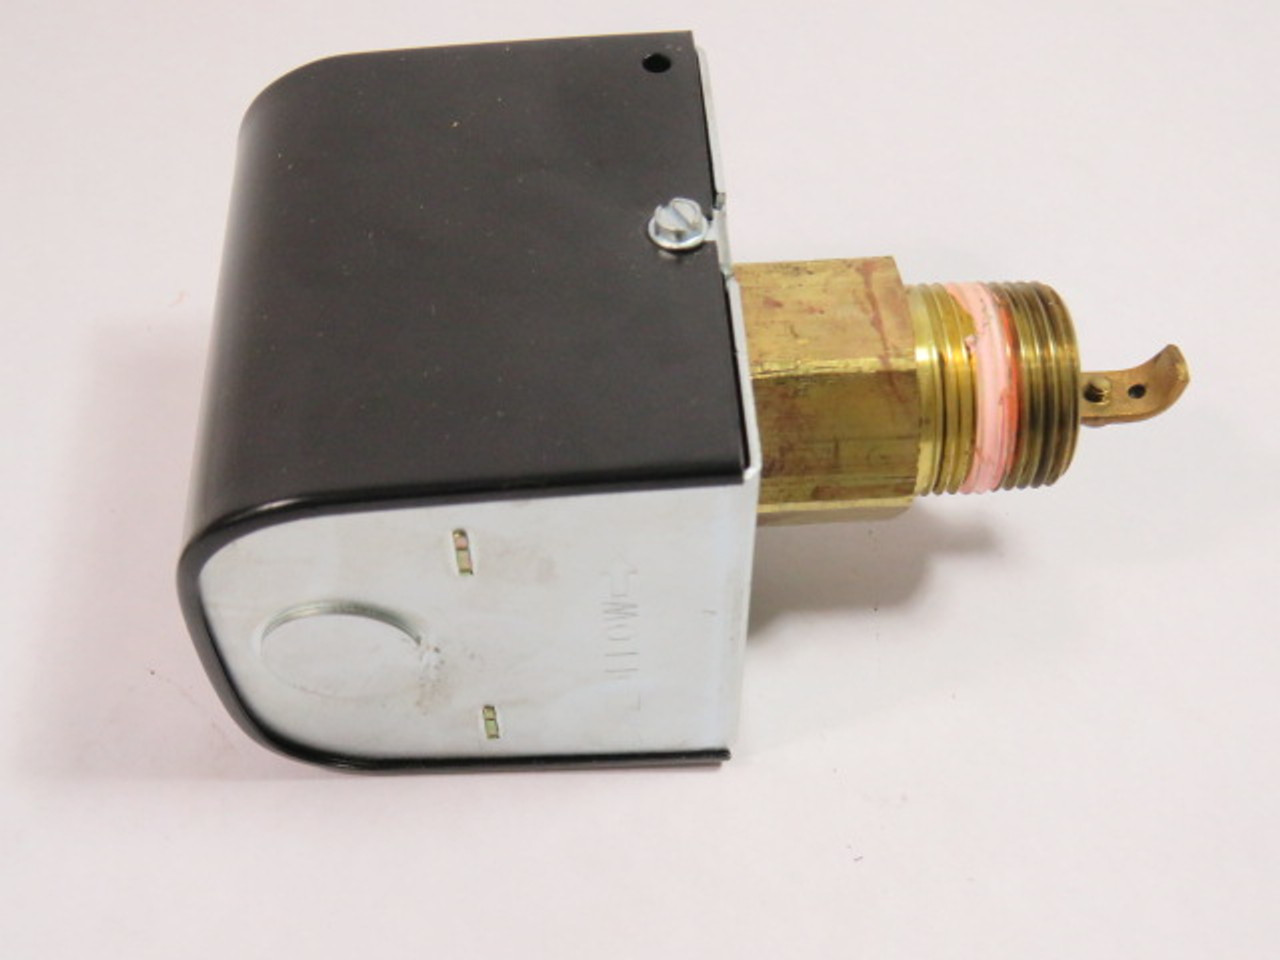 McDonnell & Miller FS4-3 Liquid Flow Switch 1" NPT 160PSI USED